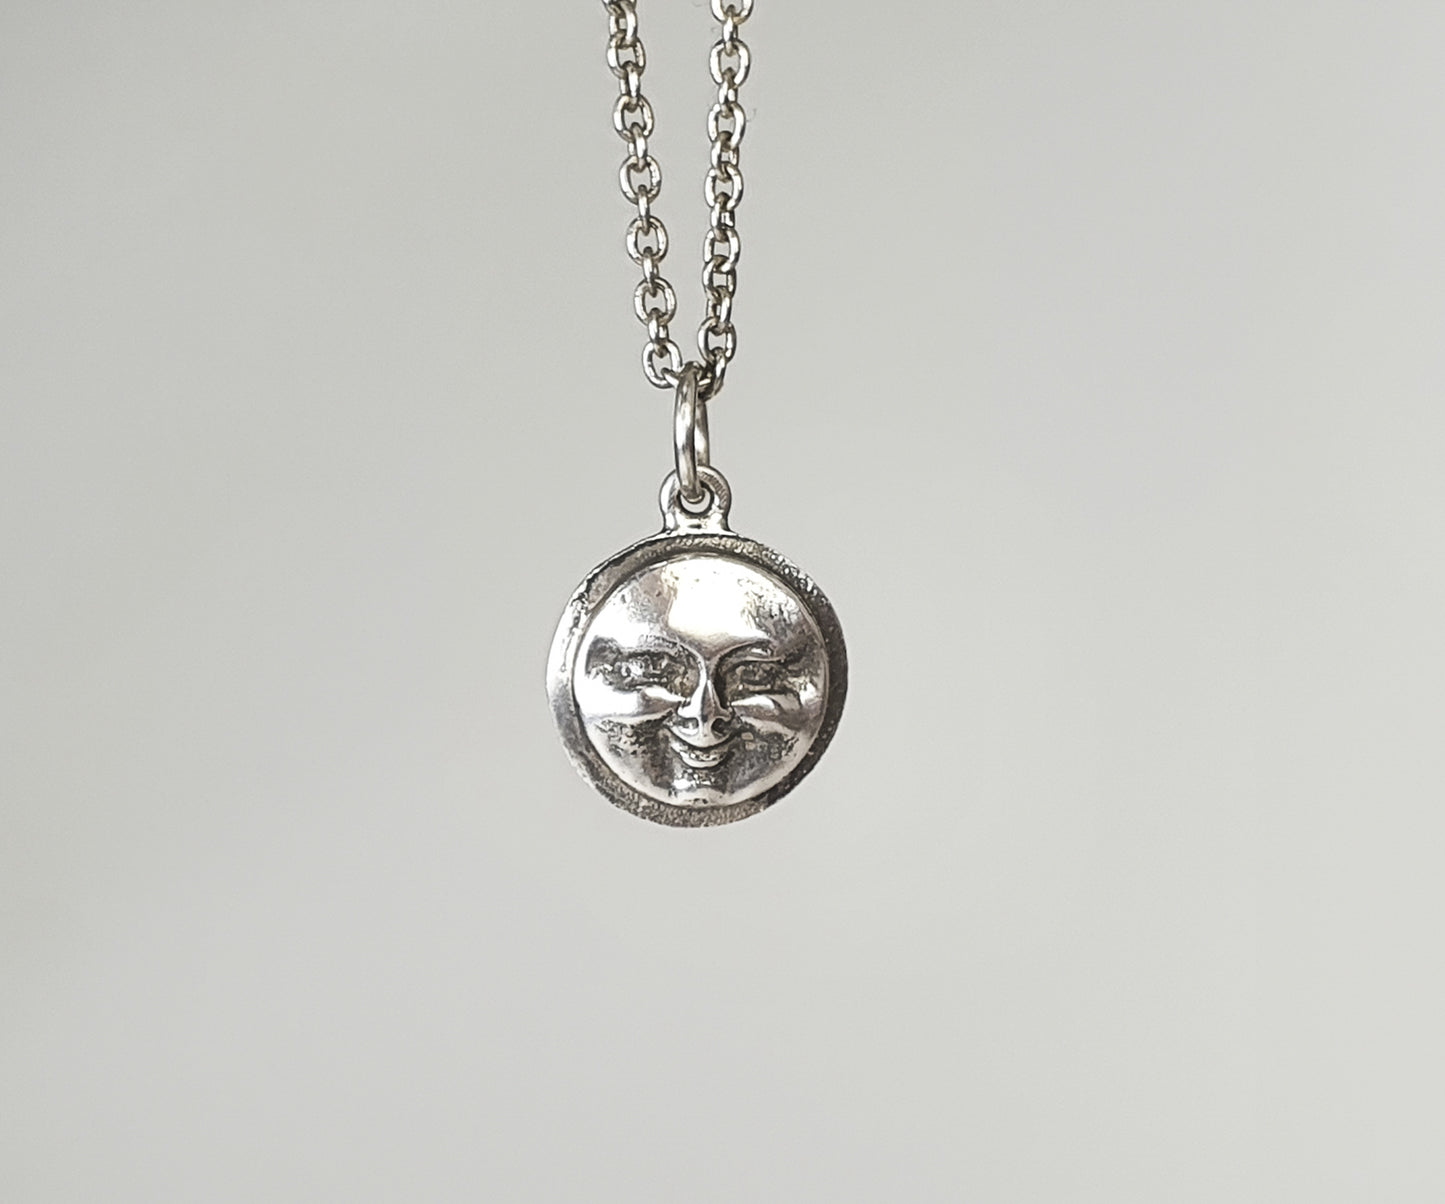 Antique Moon Face Necklace in Silver